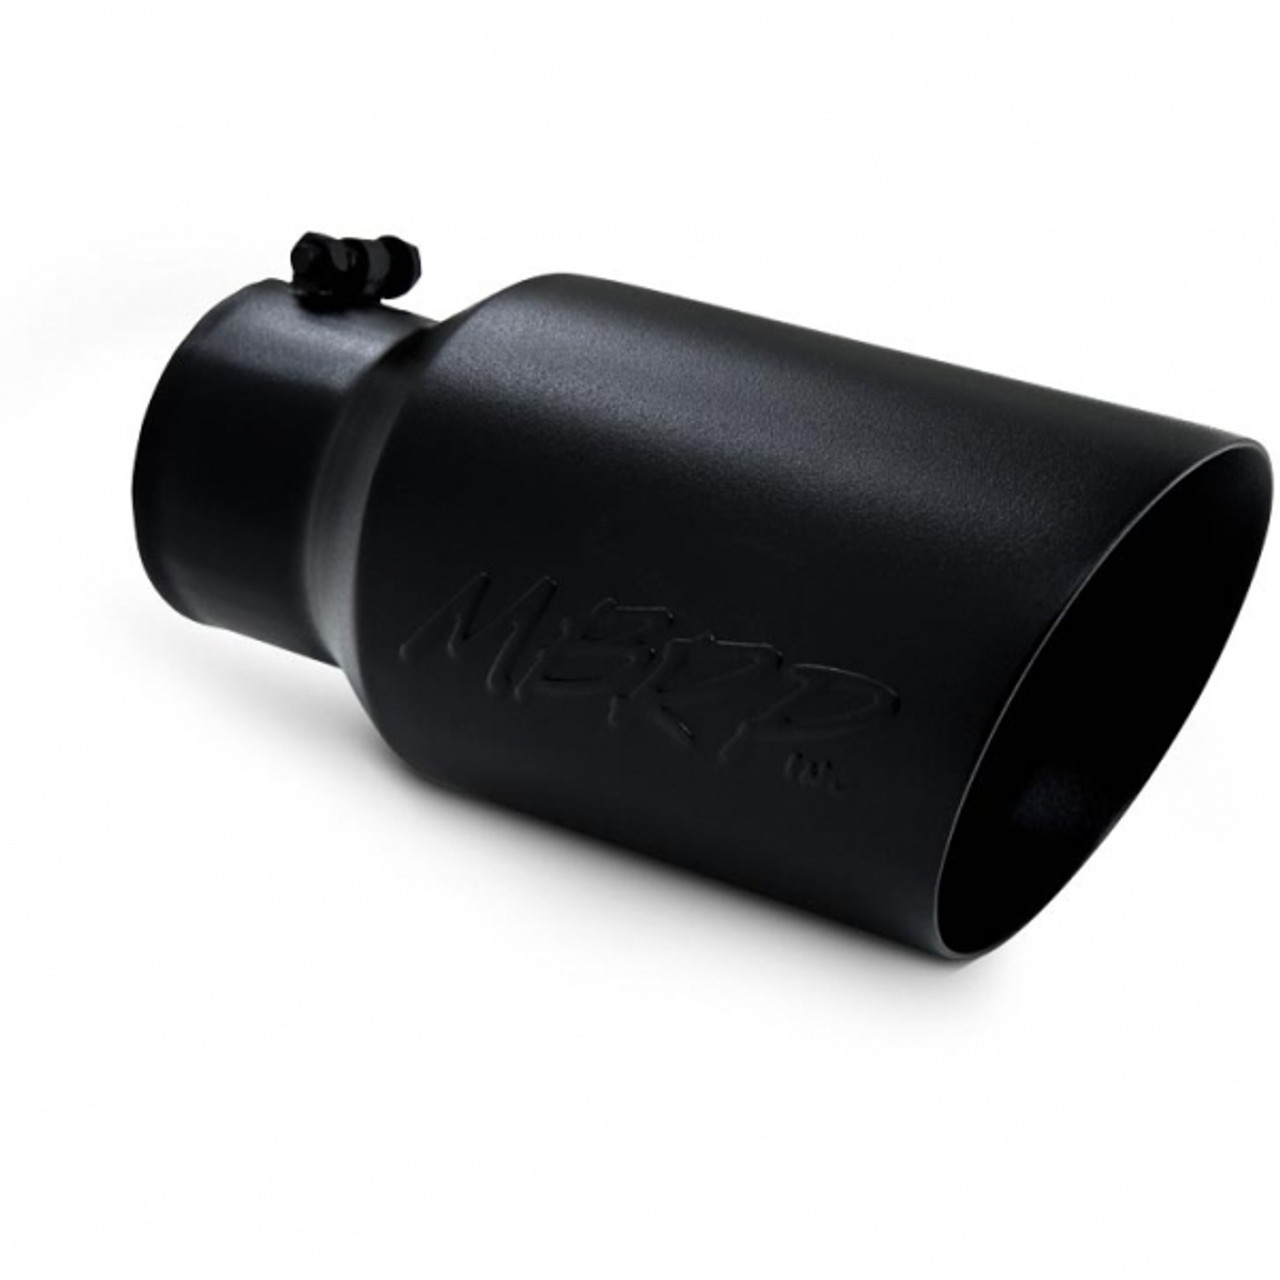 MBRP 6.7L Powerstroke Angled Exhaust Tip